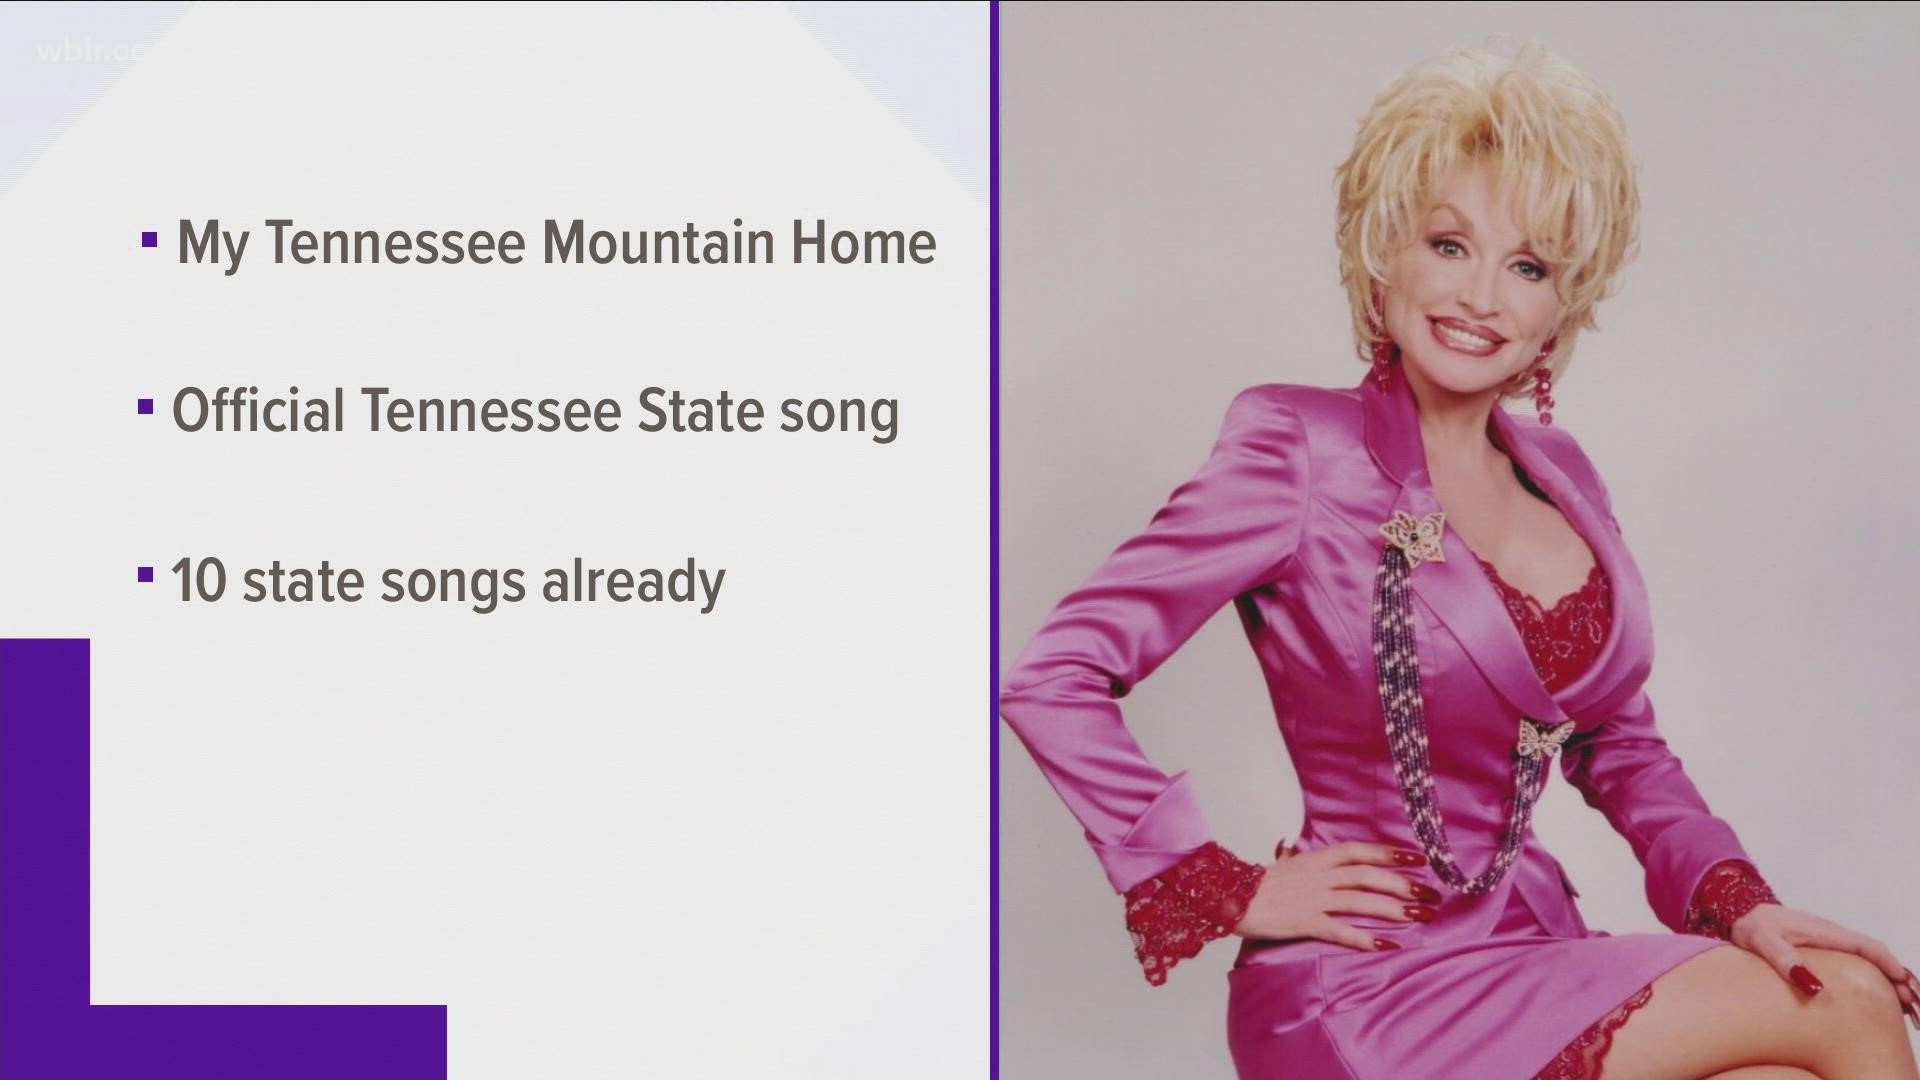 If passed, the song would join 10 other official state songs.